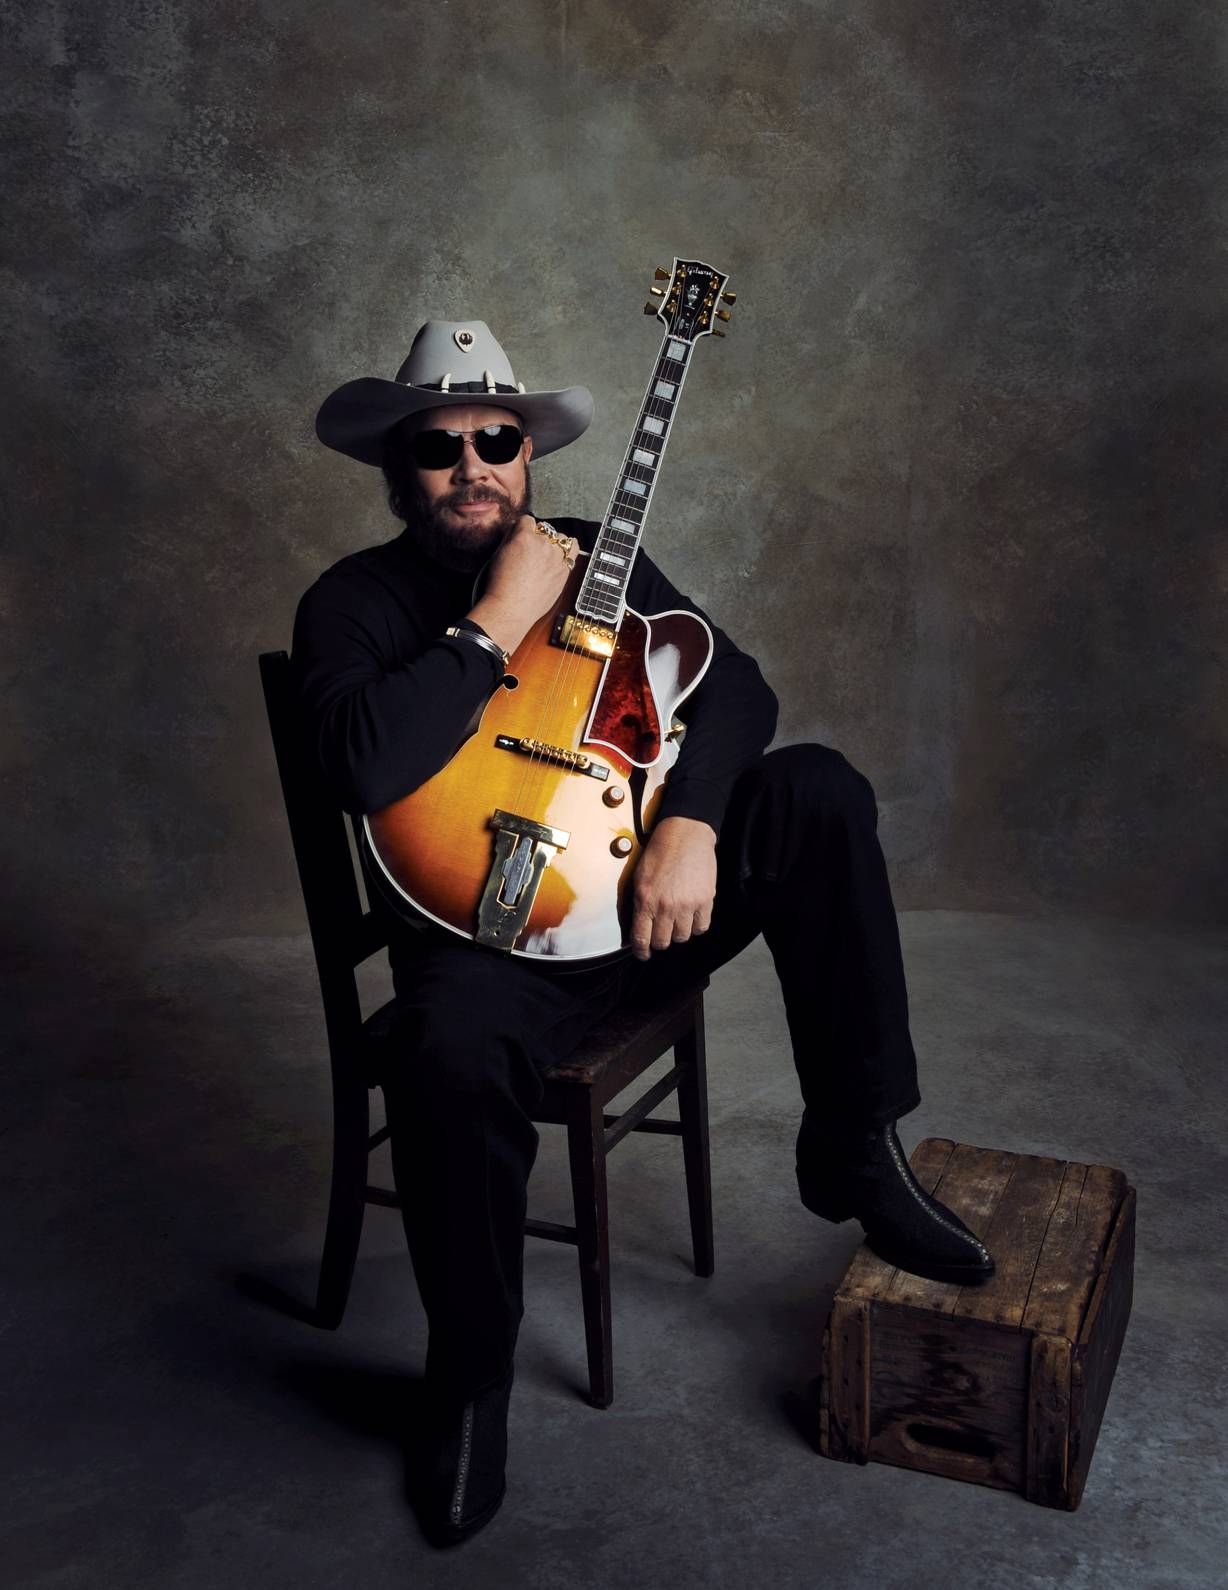 An interview with Hank Williams, Jr